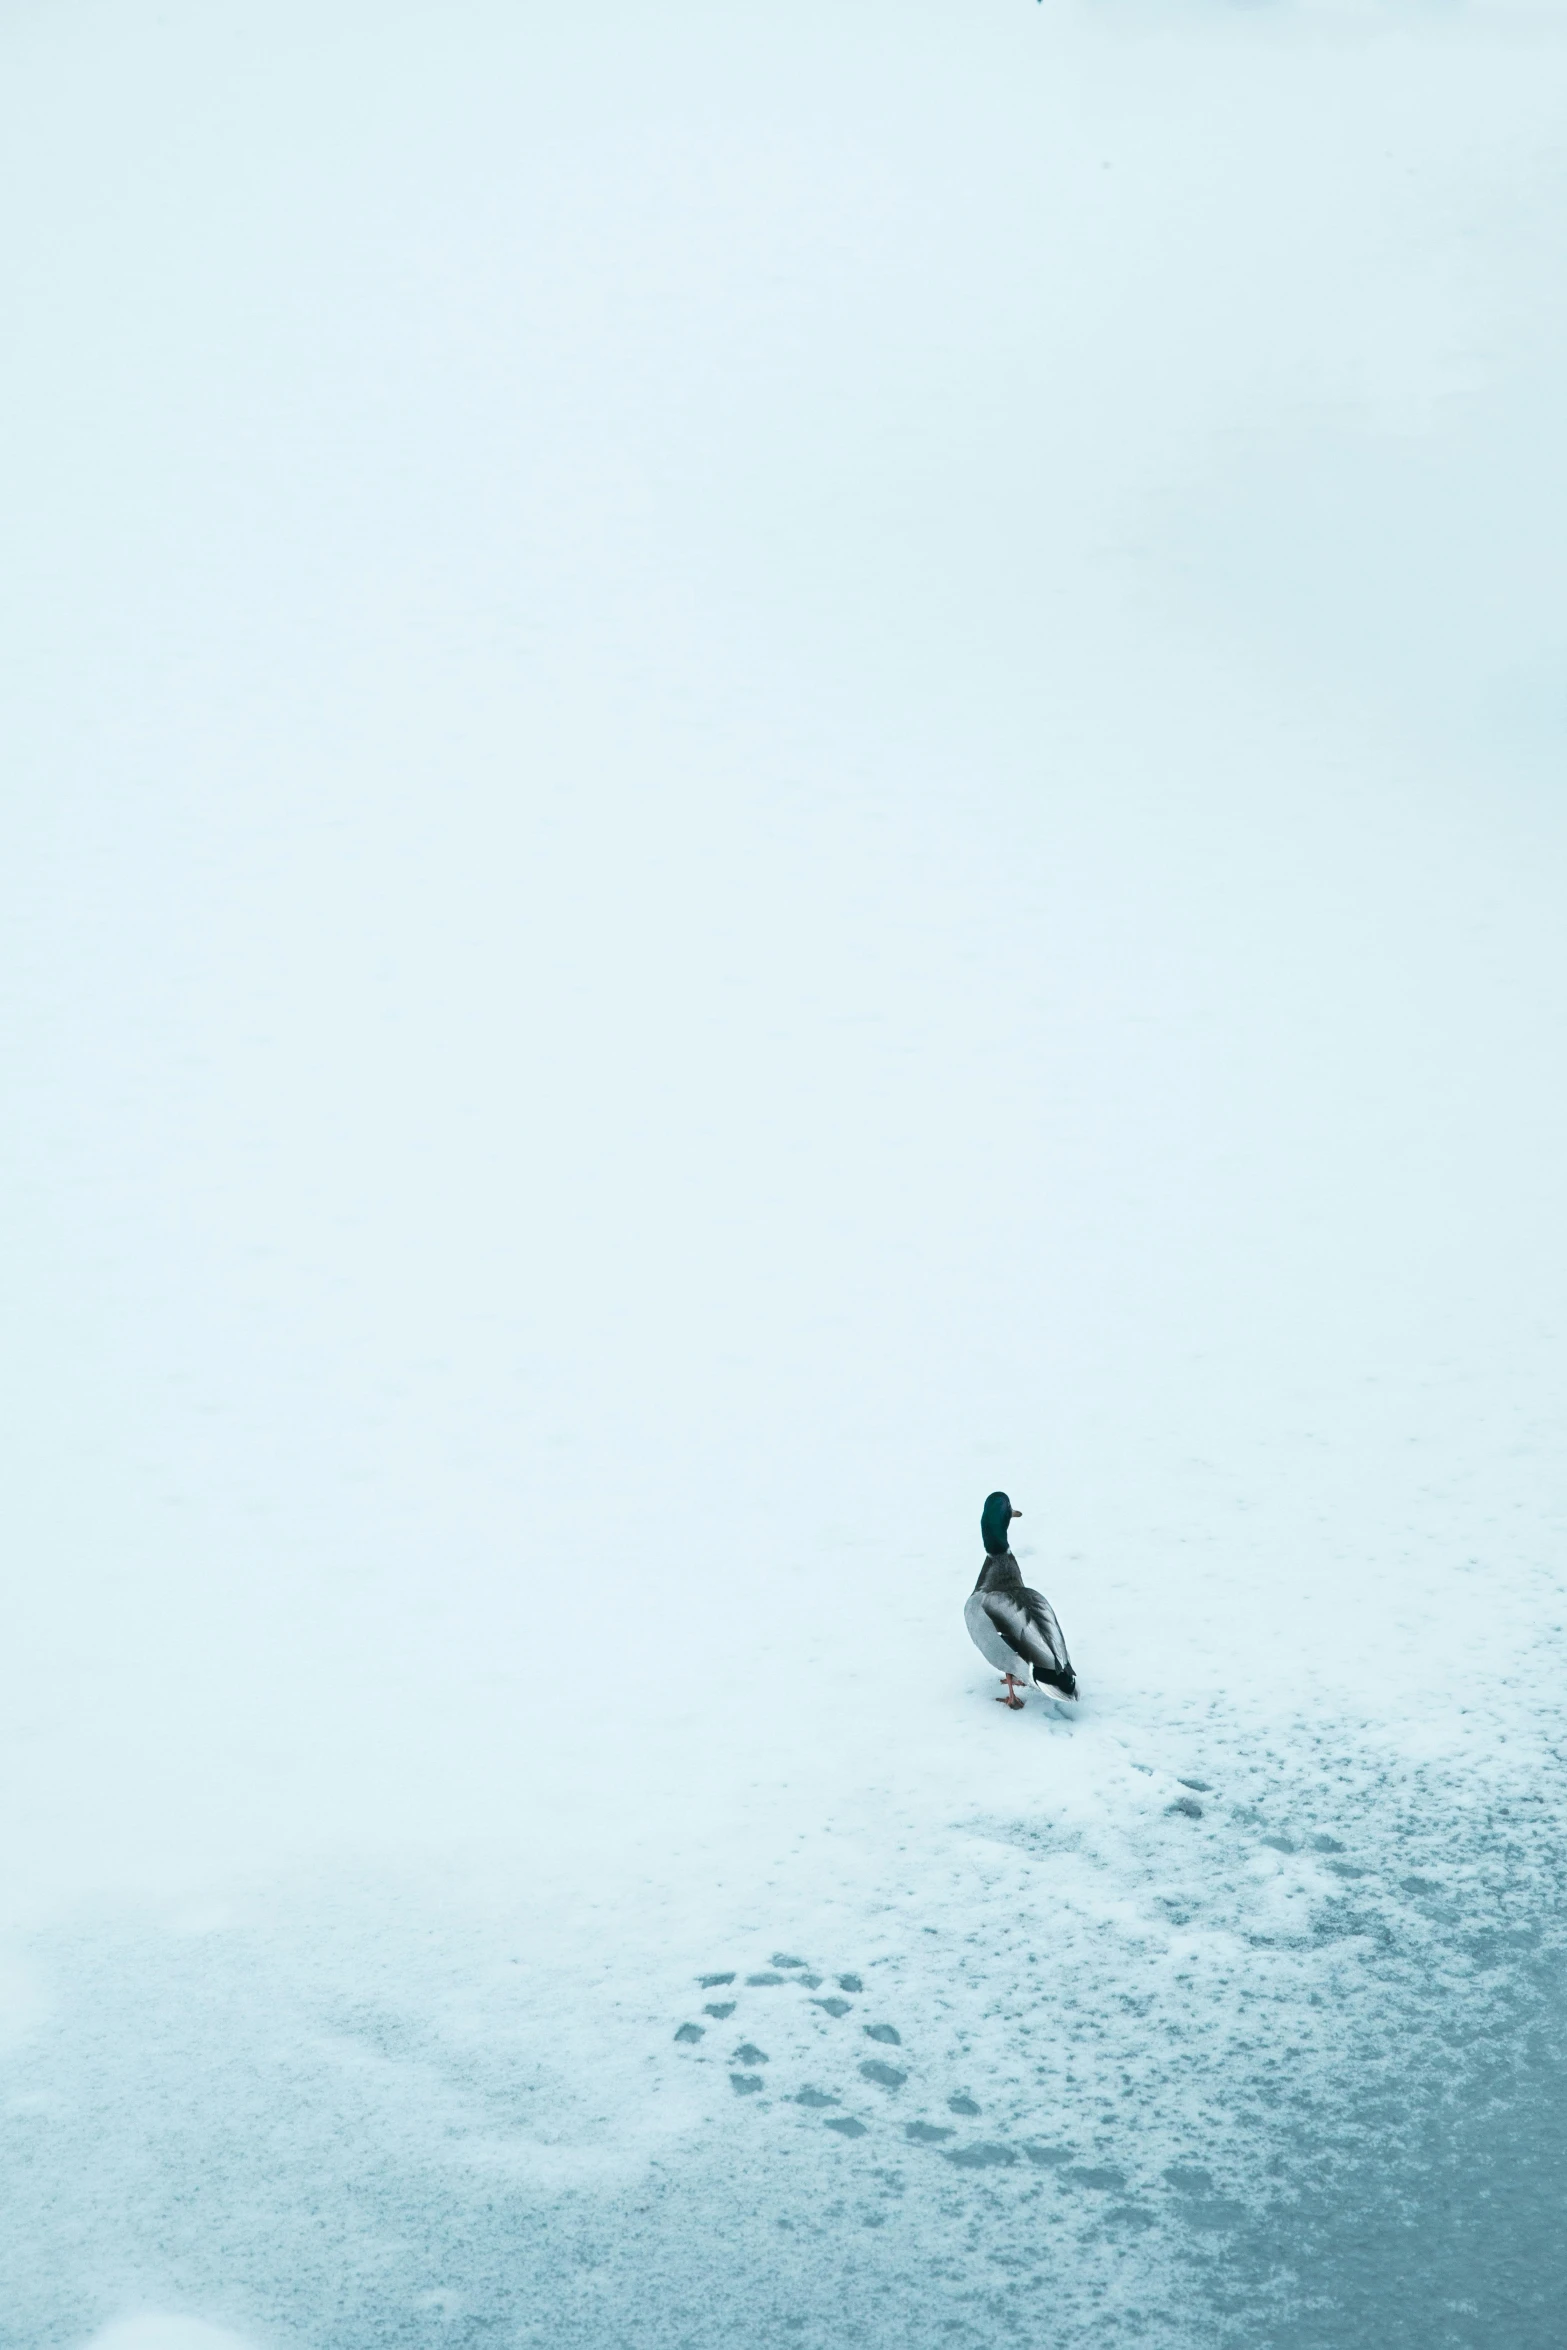 a lone snowboarder skis across a snowy area